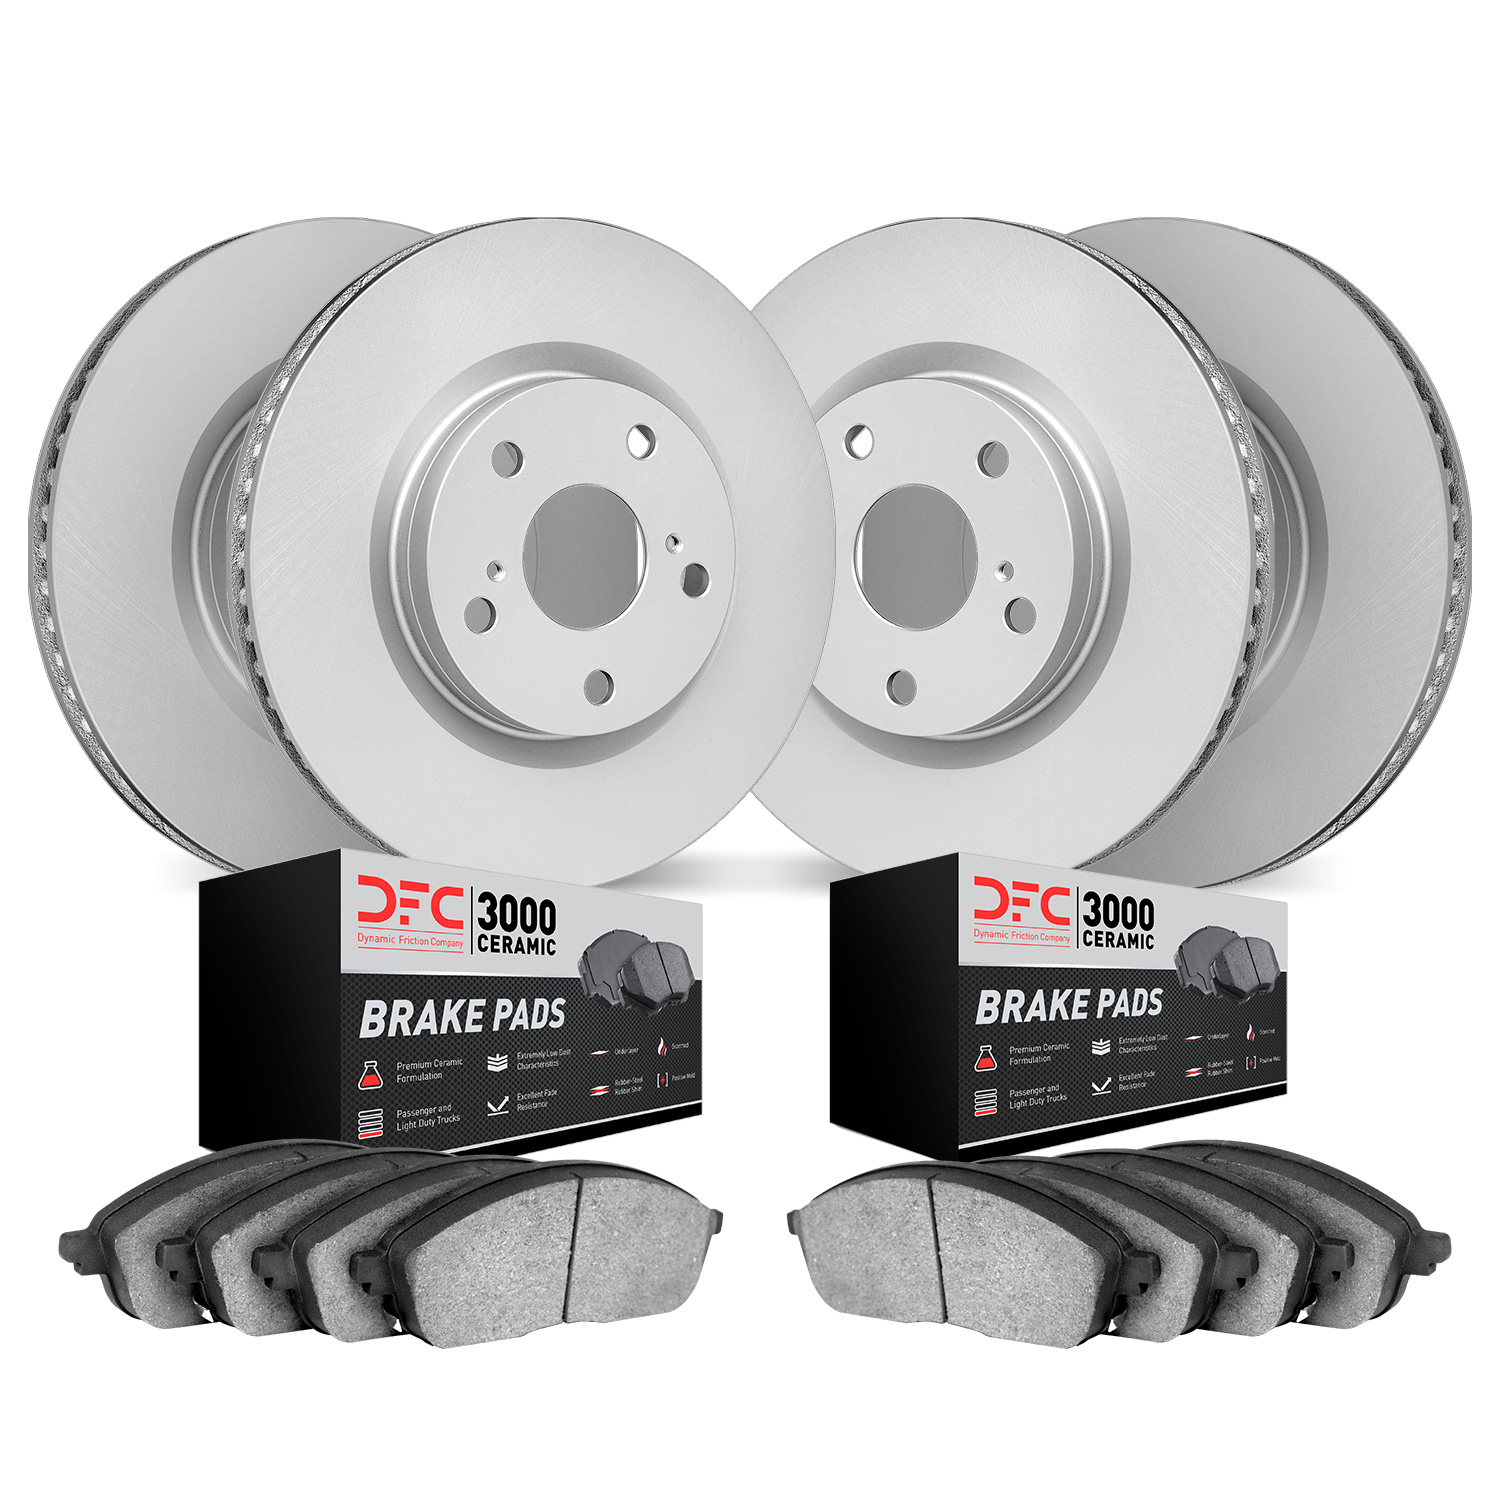 4304-31066 Geospec Brake Rotors with 3000-Series Ceramic Brake Pads Kit, 2011-2018 BMW, Position: Front and Rear